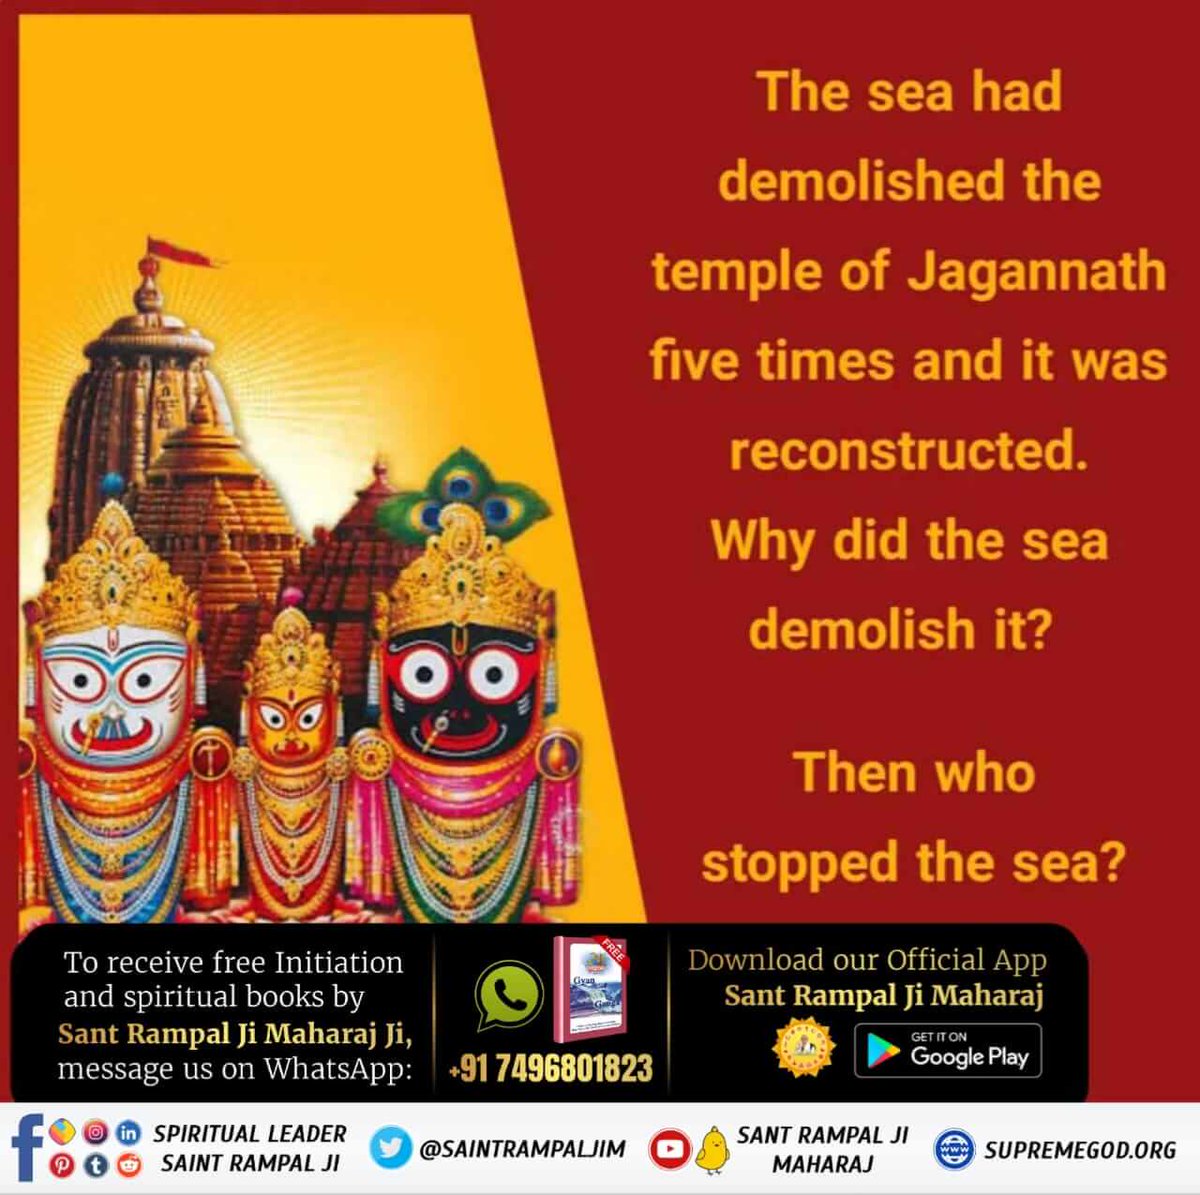 #GodMorningFriday
▪️The temple of Jagannath was repeatedly destroyed by the sea.
▪️It was God Kabir who had stopped the ocean from breaking the temple.
#TrueStoryOfJagannath